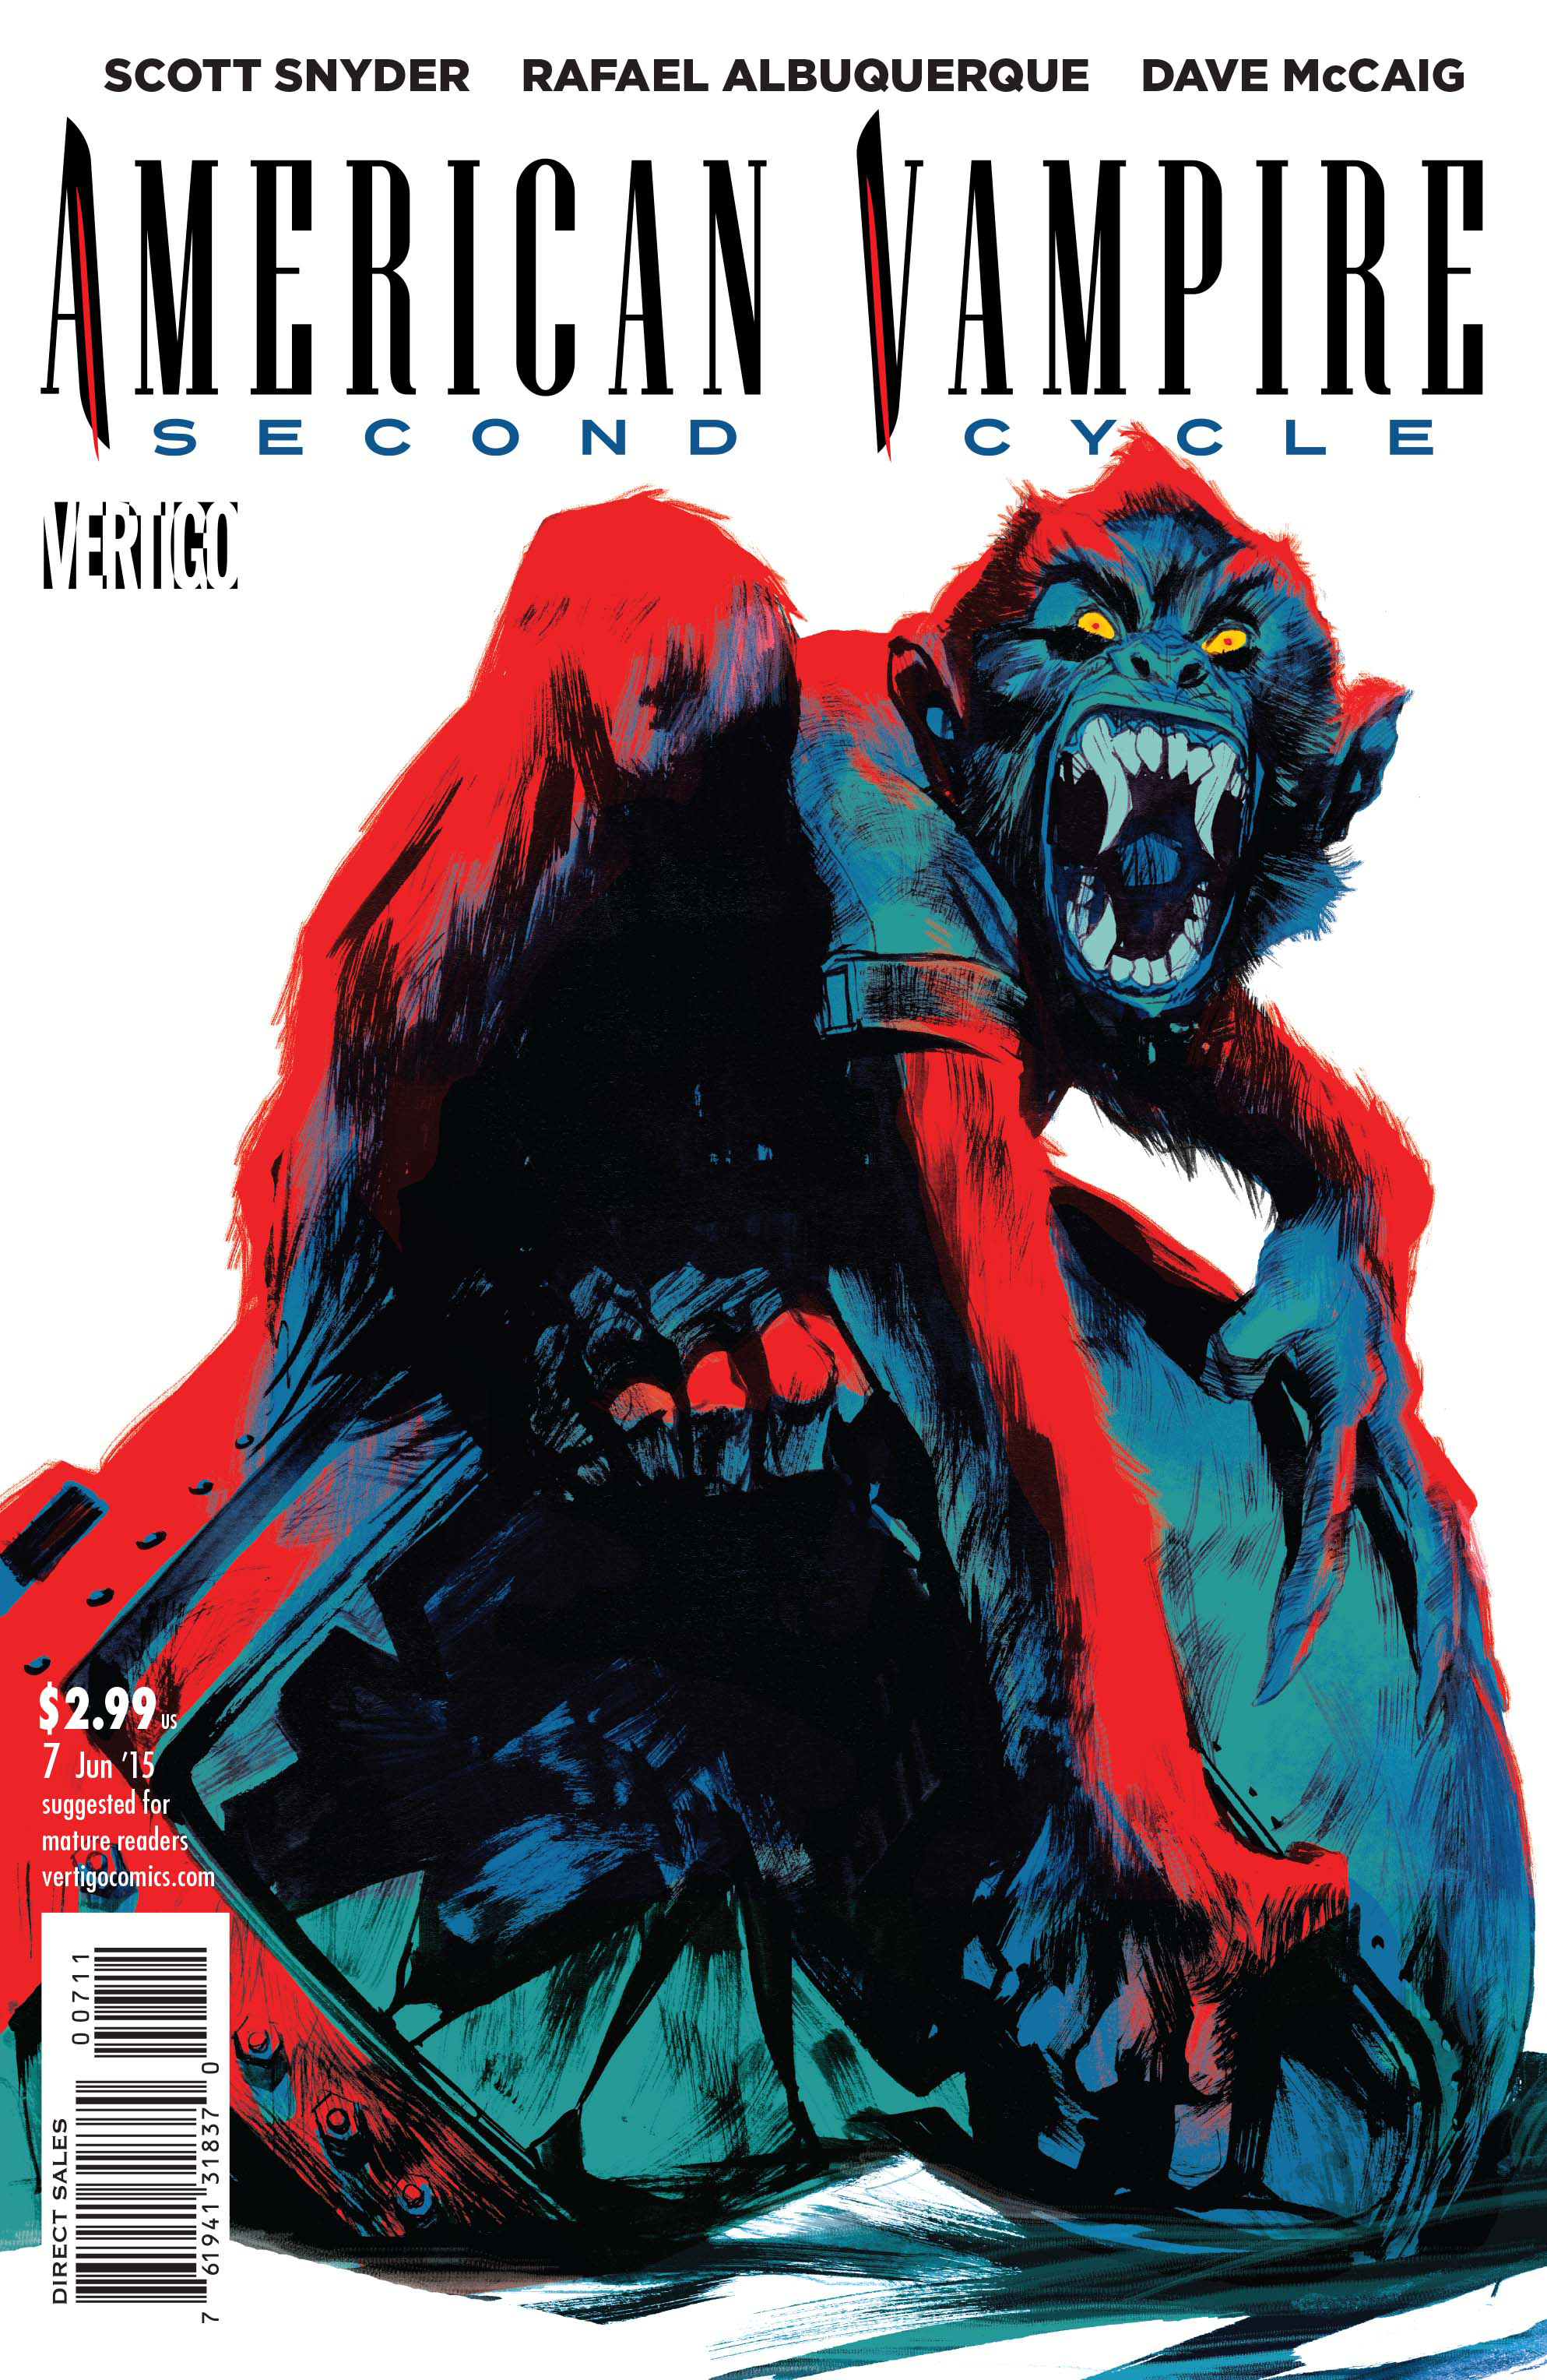 AMERICAN VAMPIRE SECOND CYCLE #7 (RES) (MR)